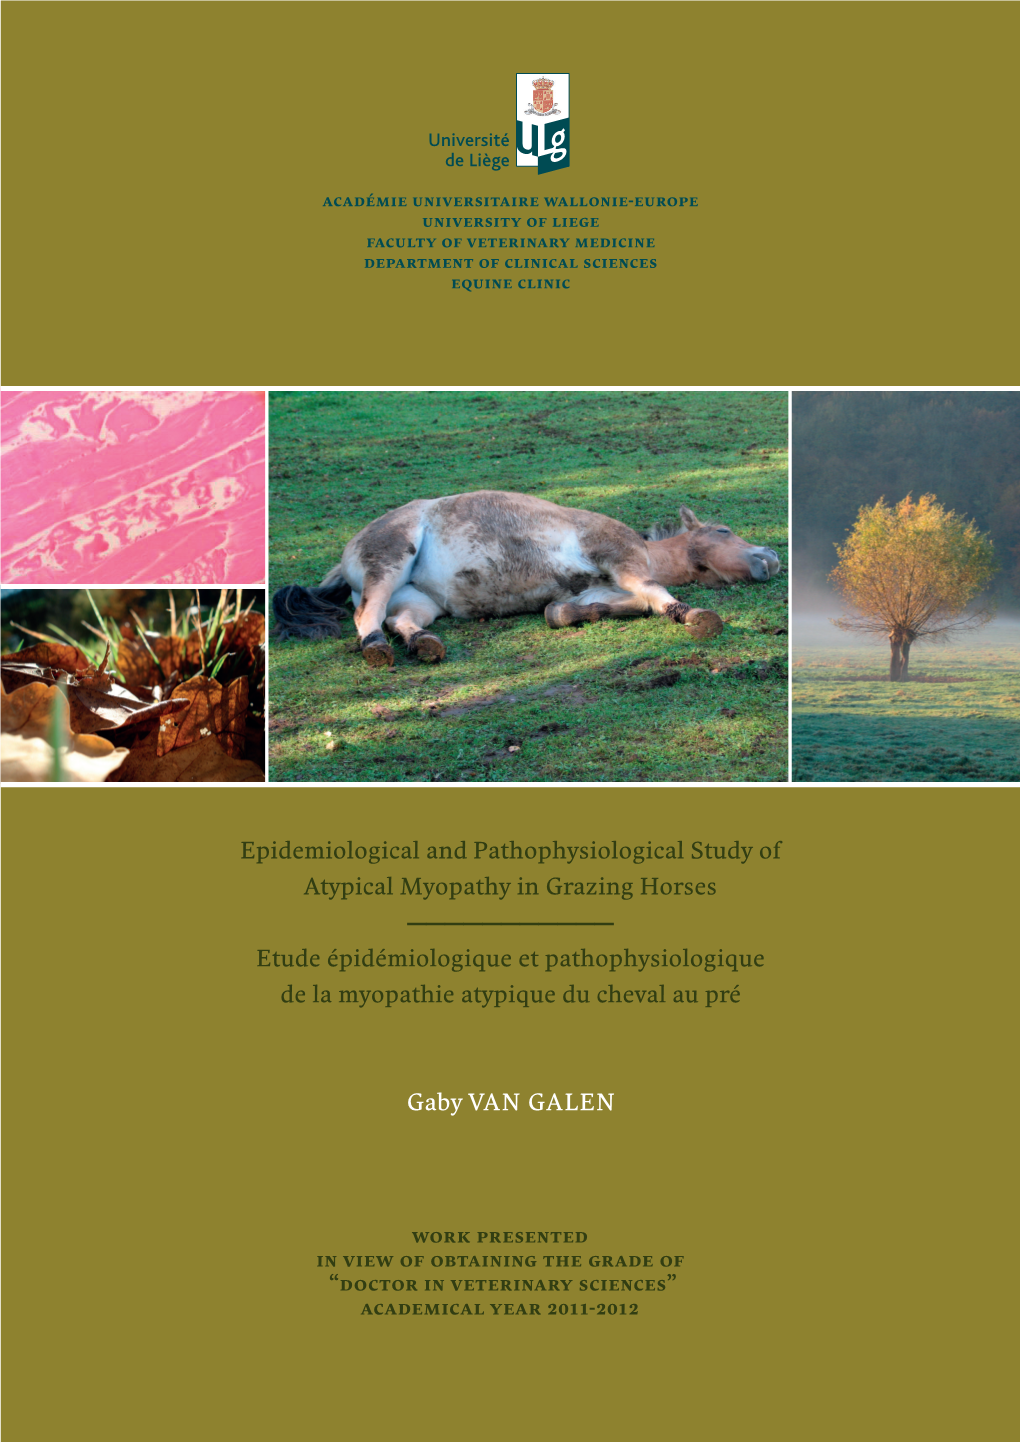 Epidemiological and Pathophysiological Study of Atypical Myopathy in Grazing Horses